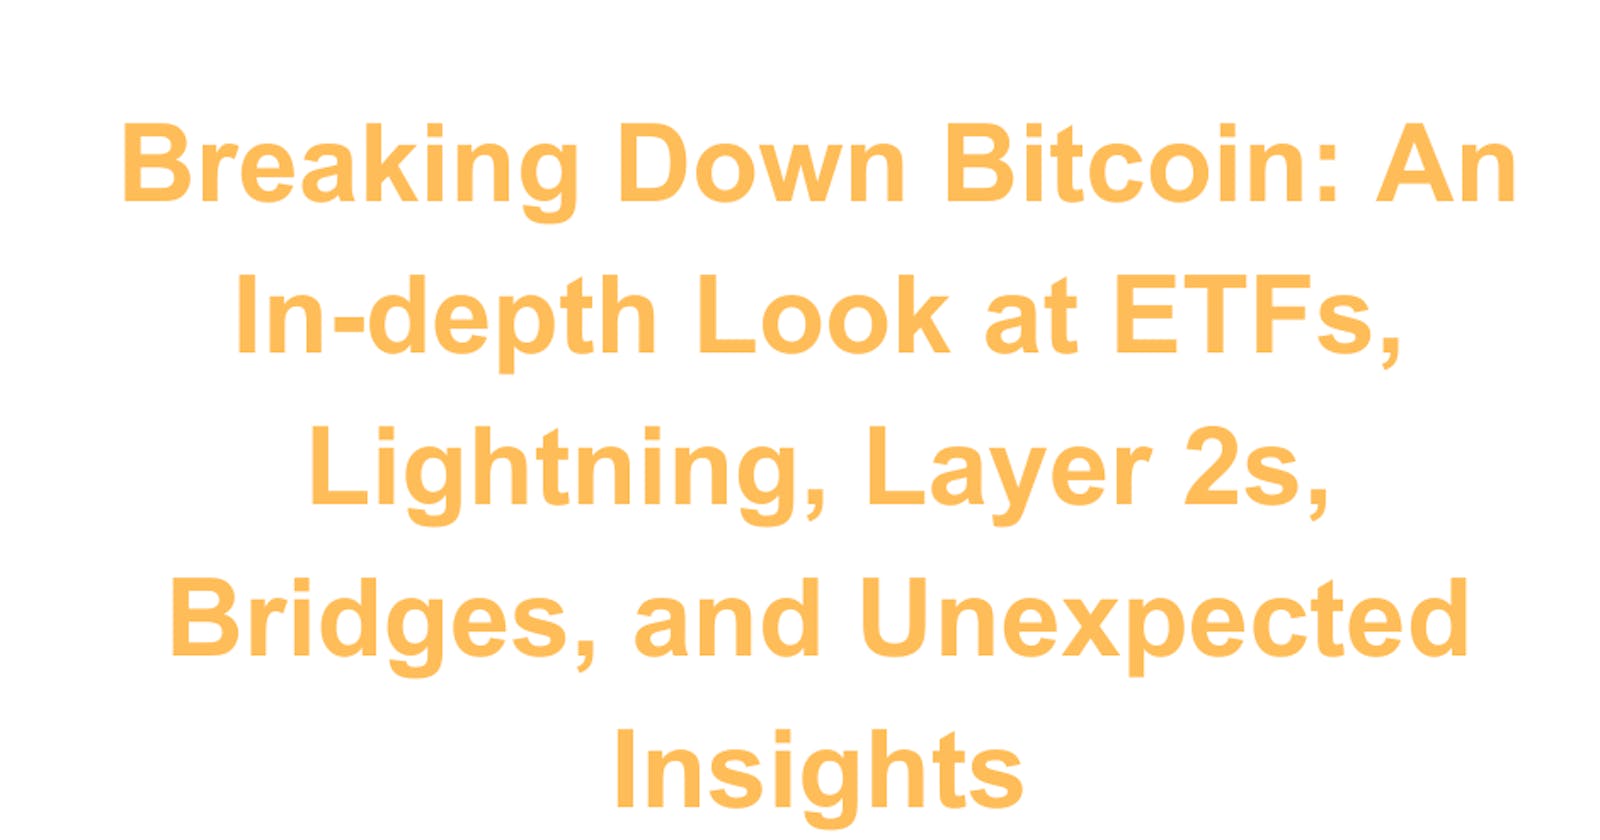 Breaking Down Bitcoin: An In-depth Look at ETFs, Lightning, Layer 2s, Bridges, and Unexpected Insights